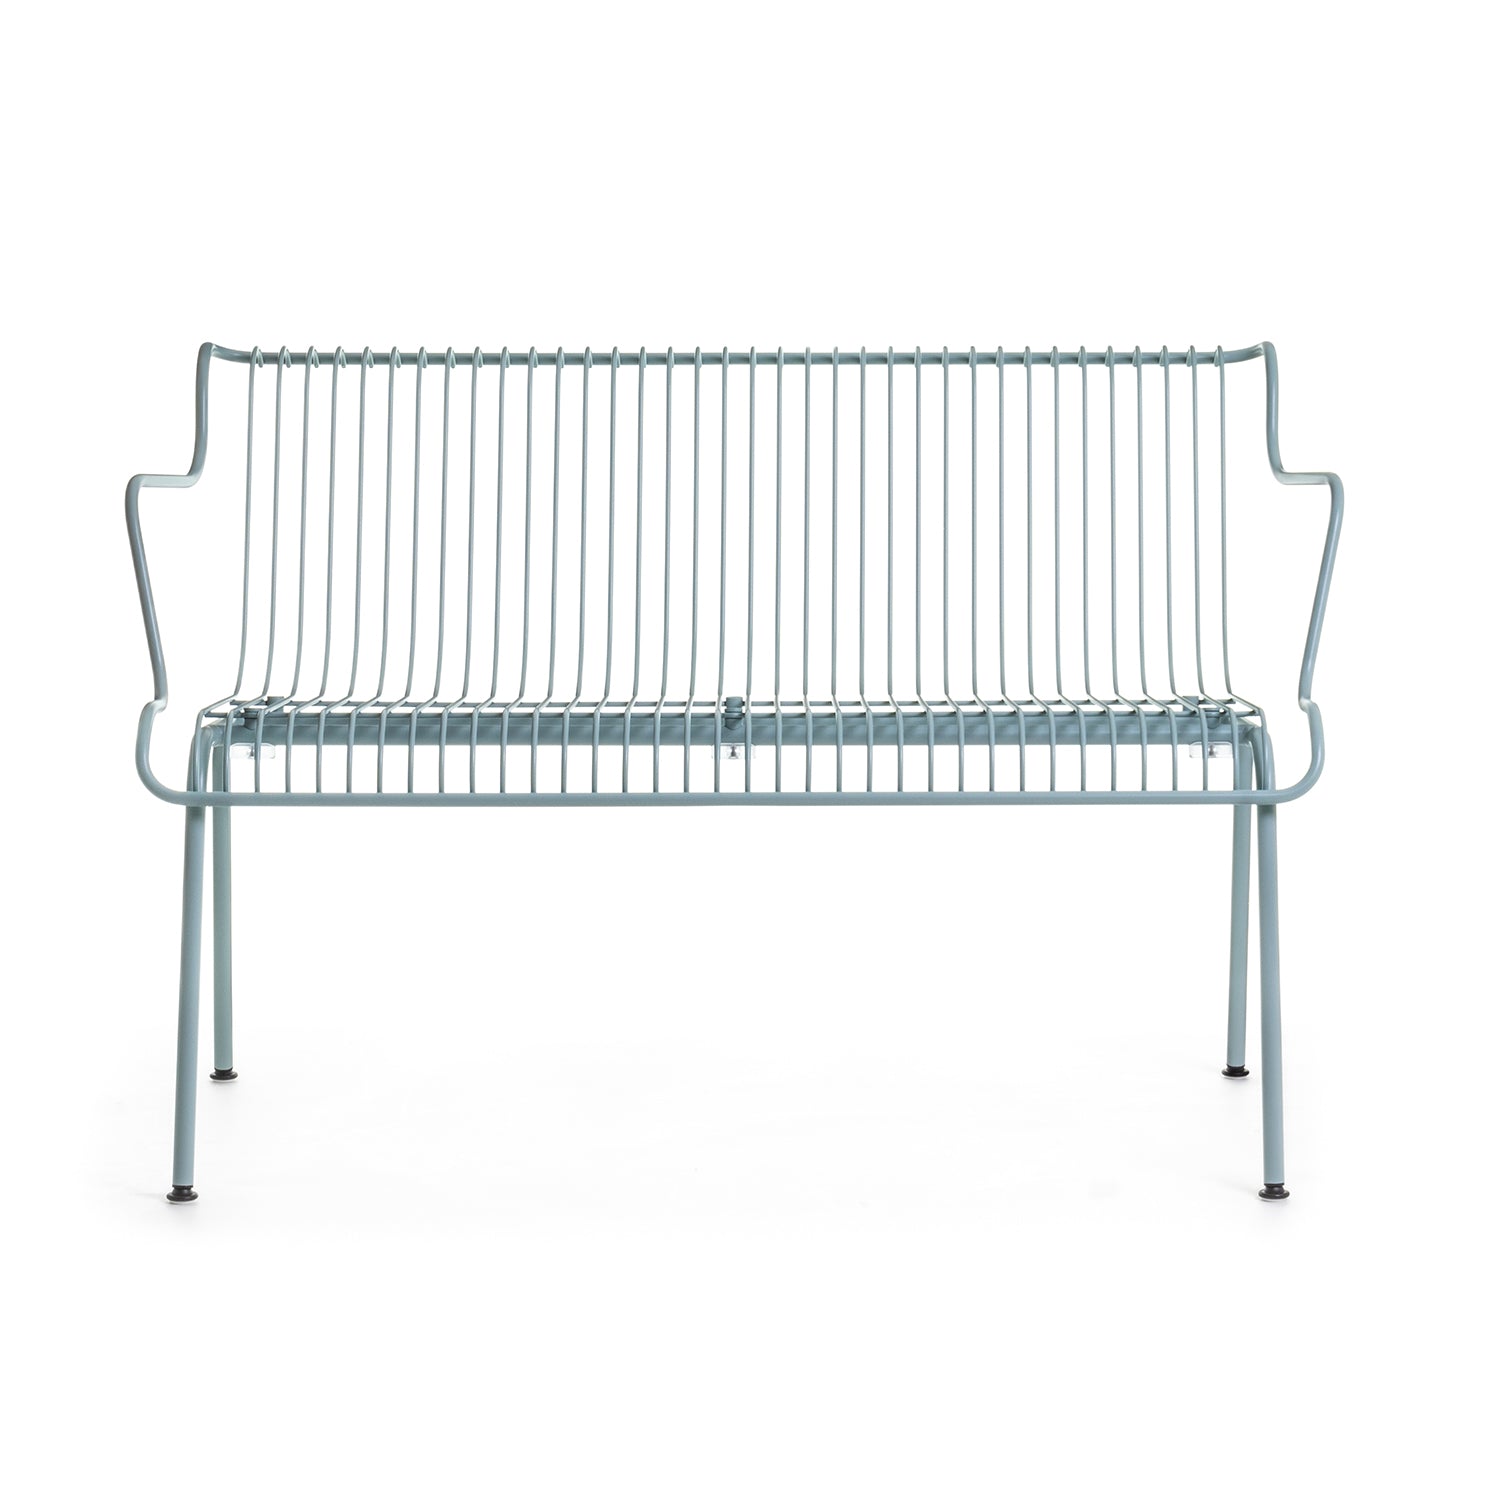 Magis South Dining Bench in light blue